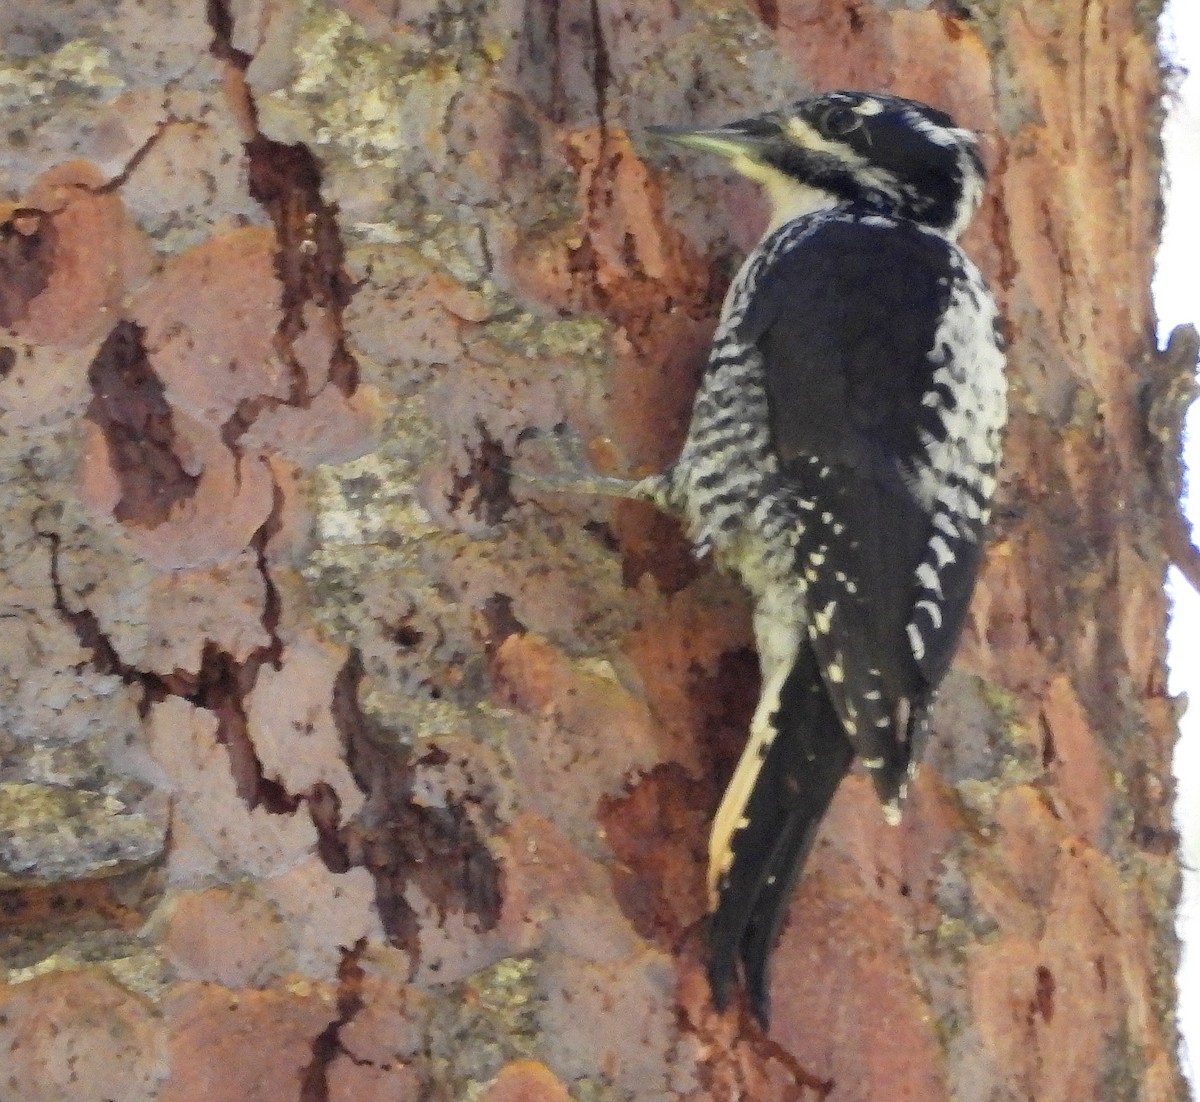 American Three-toed Woodpecker - Diana LaSarge and Aaron Skirvin